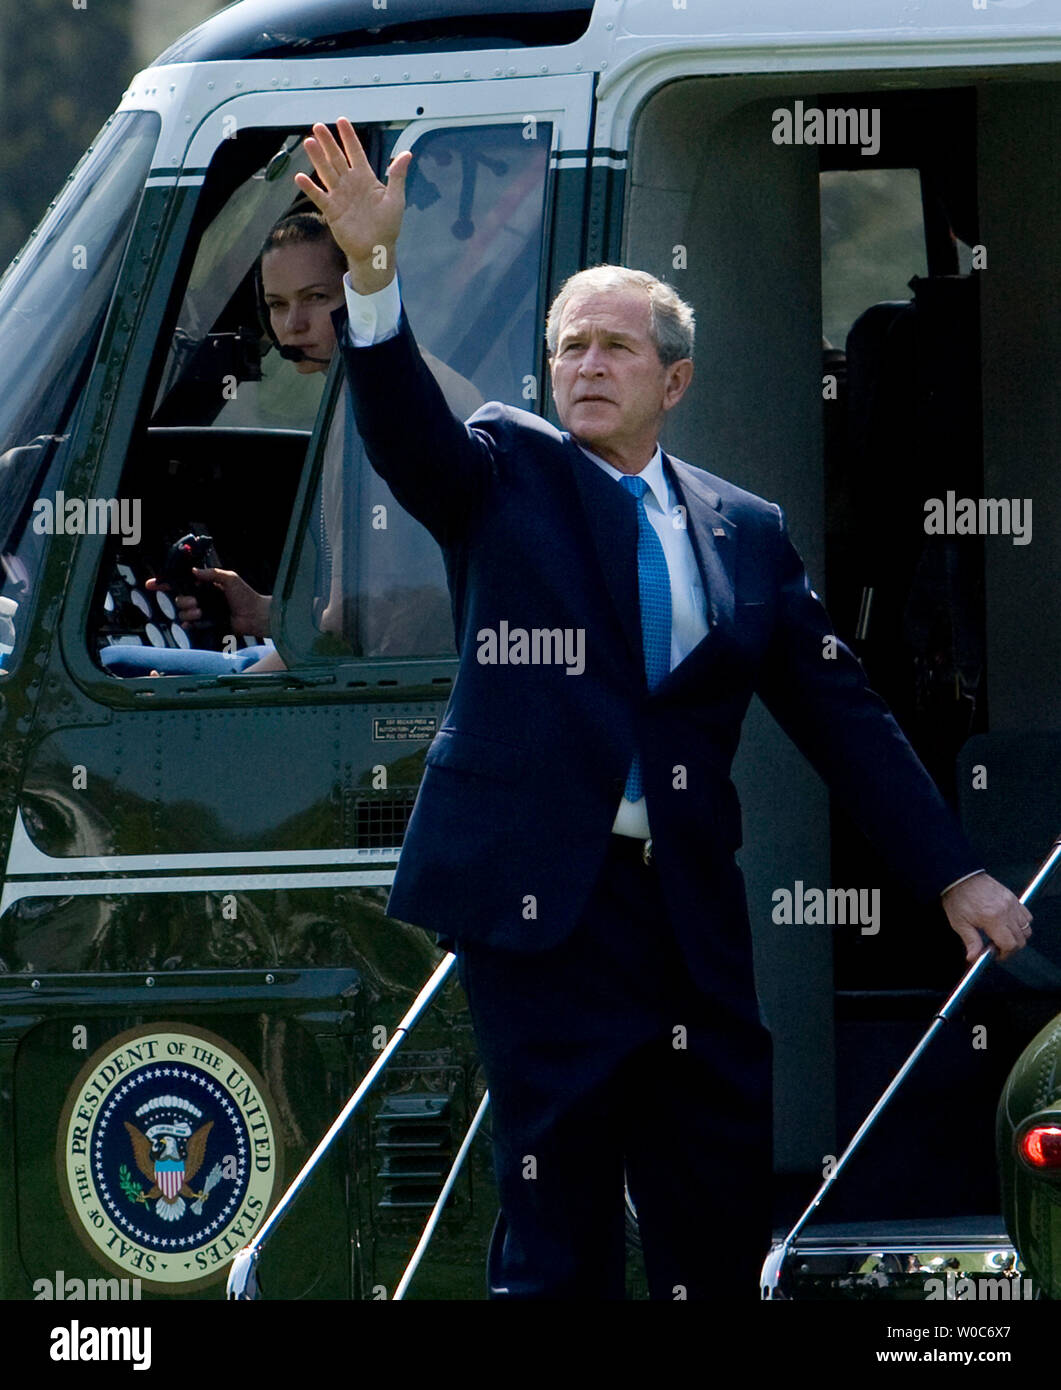 U.S. President George W. Bush departs the White House en route to his ranch in Crawford, Texas in Washington on April 10, 2008. (UPI Photo/Patrick D. McDermott) Stock Photo